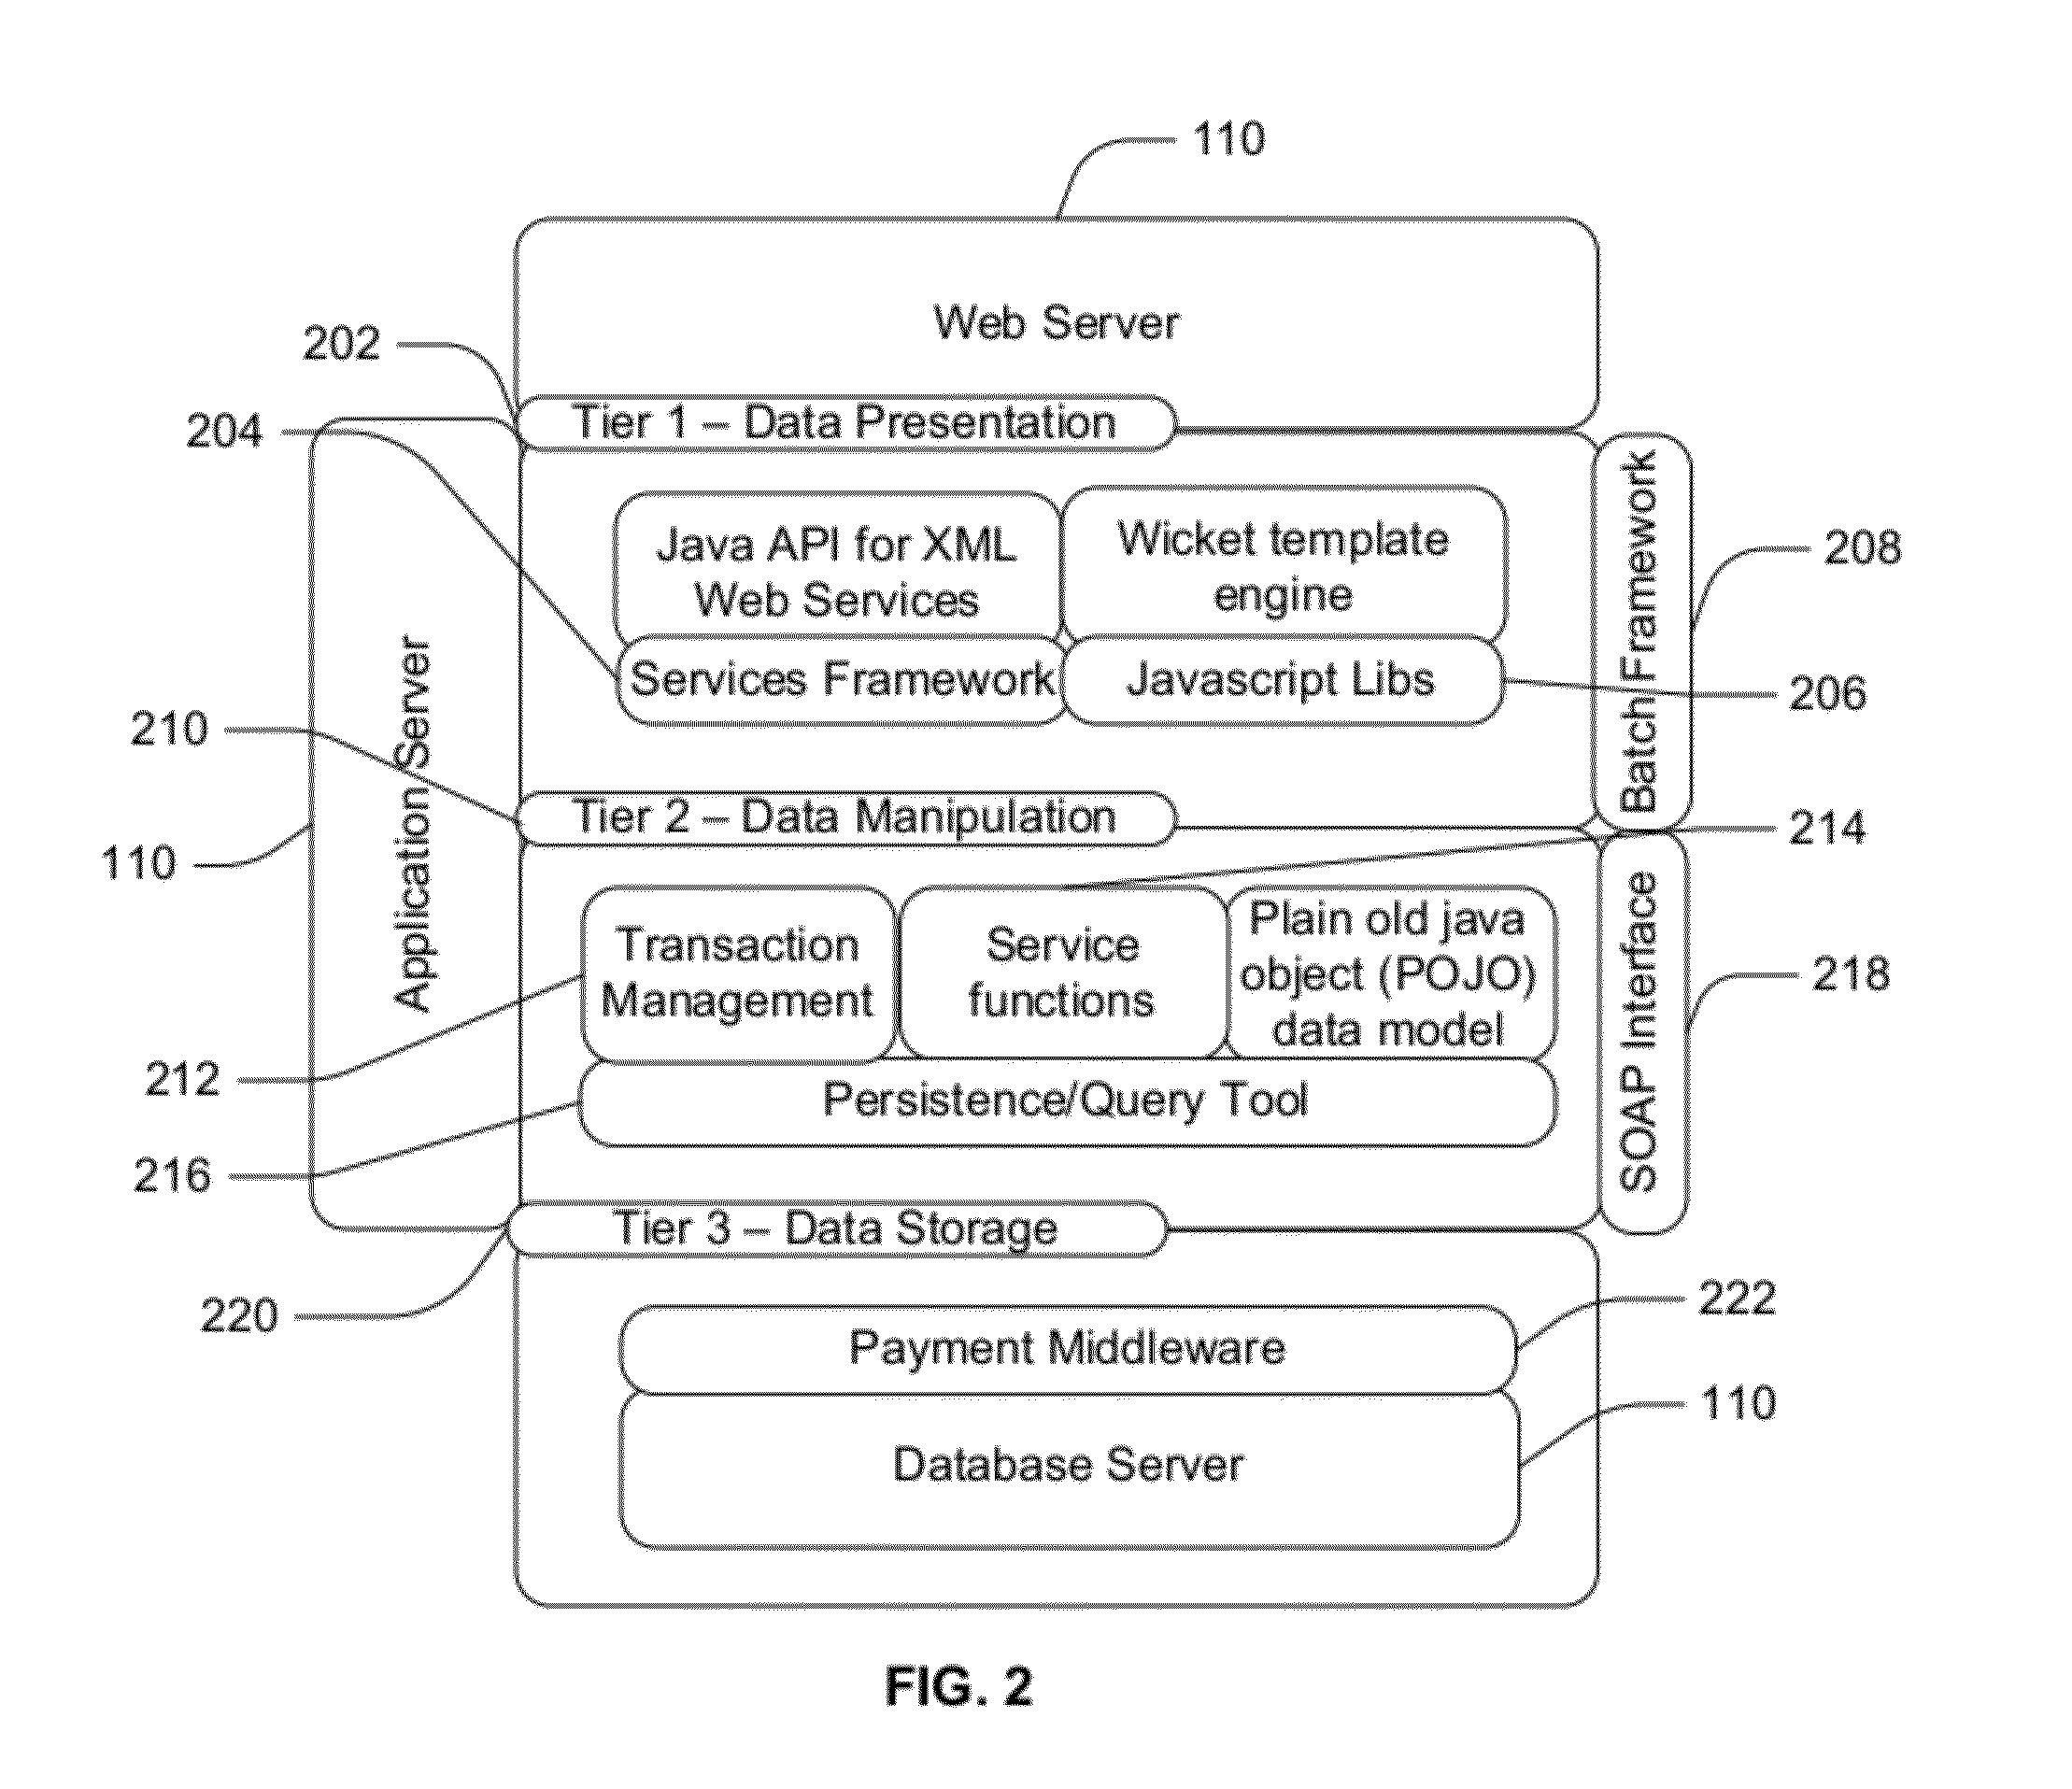 In-Application Commerce System and Method with Fraud Detection